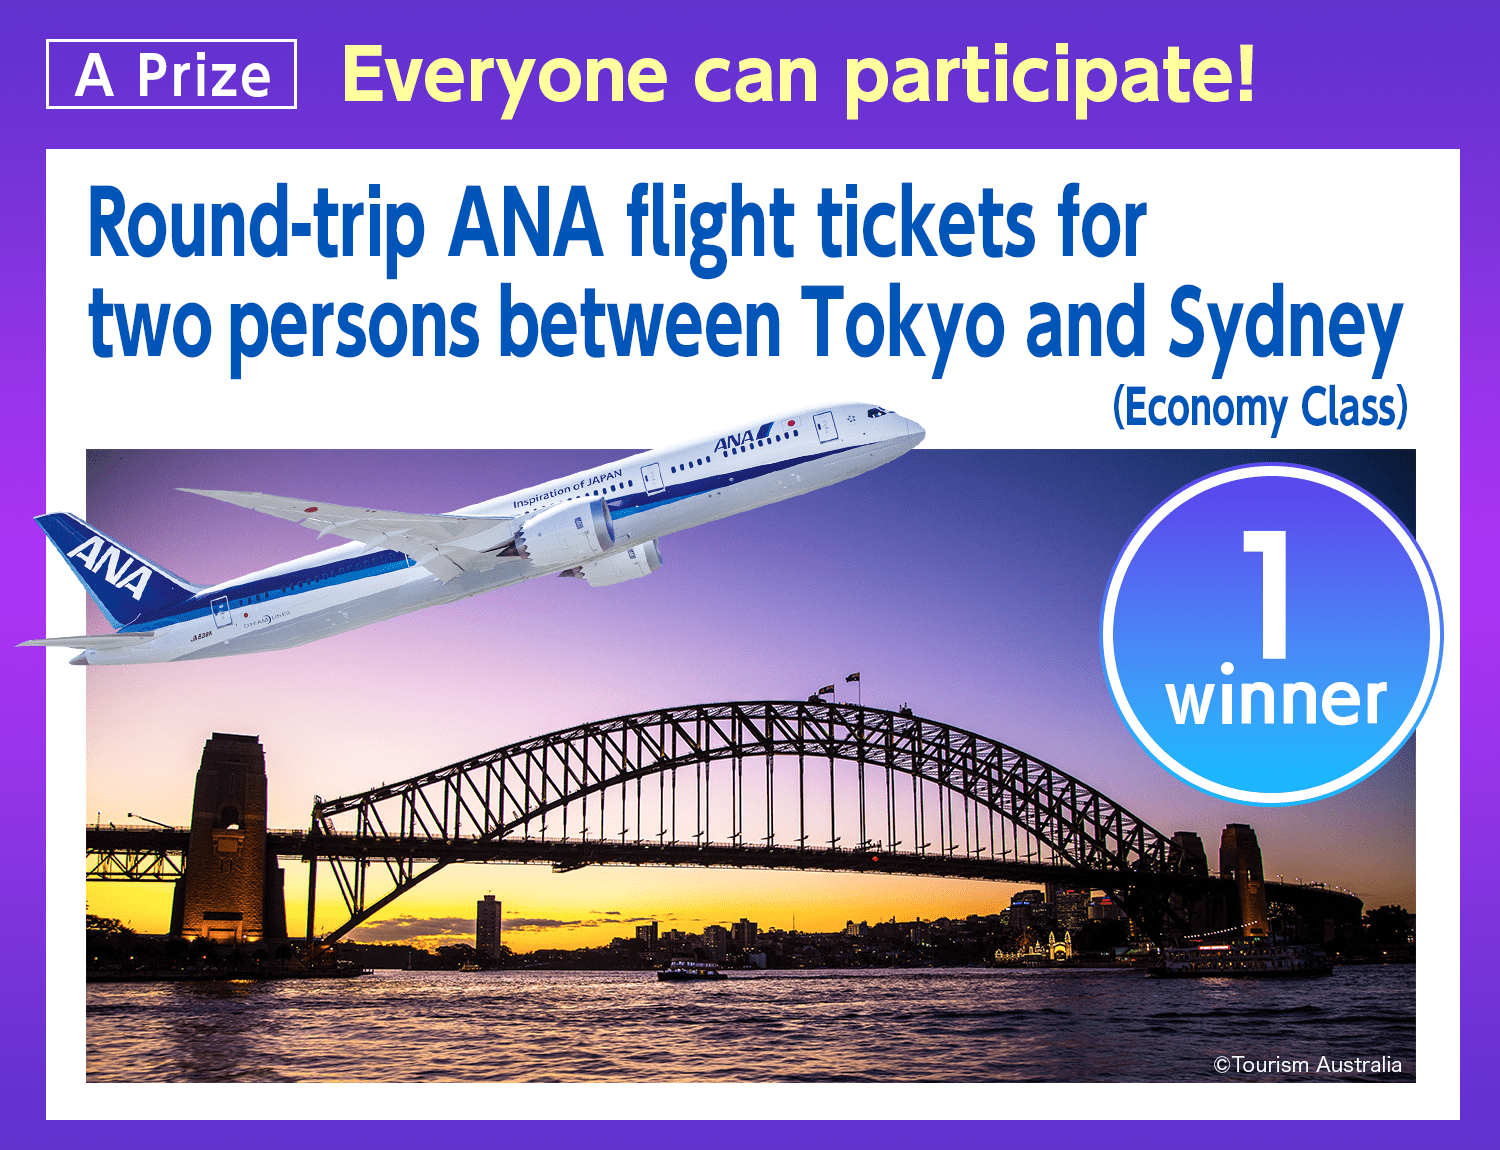 A Prize: Everyone can participate!Round-trip ANA flight tickets for two persons between Tokyo and Sydney (Economy Class)
		1 winner